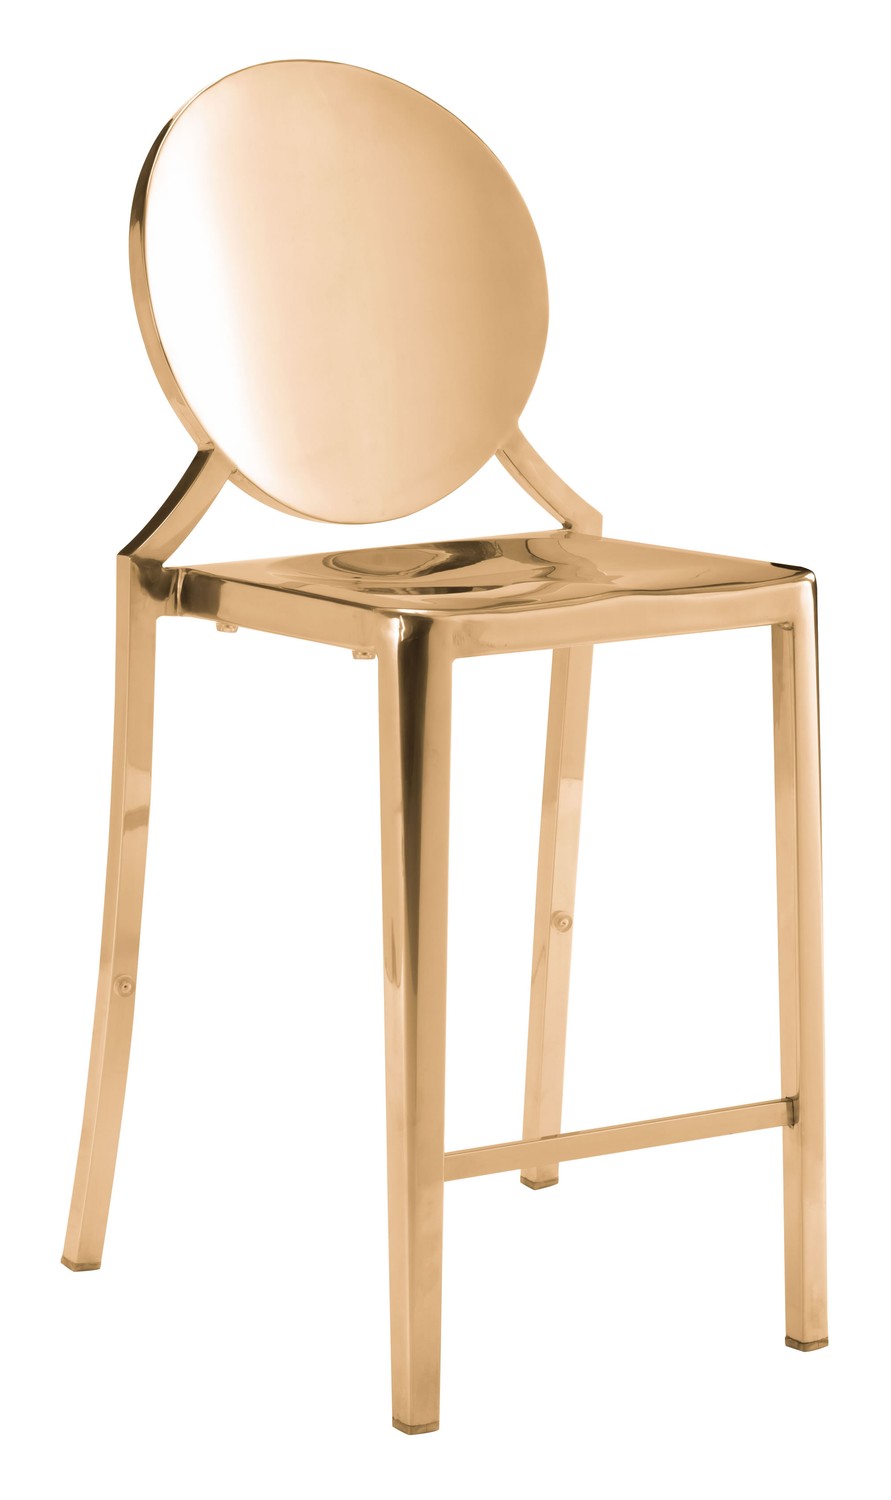 18.3" x 18.5" x 39" Gold, Polished Stainless Steel, Counter Chair - Set of 2